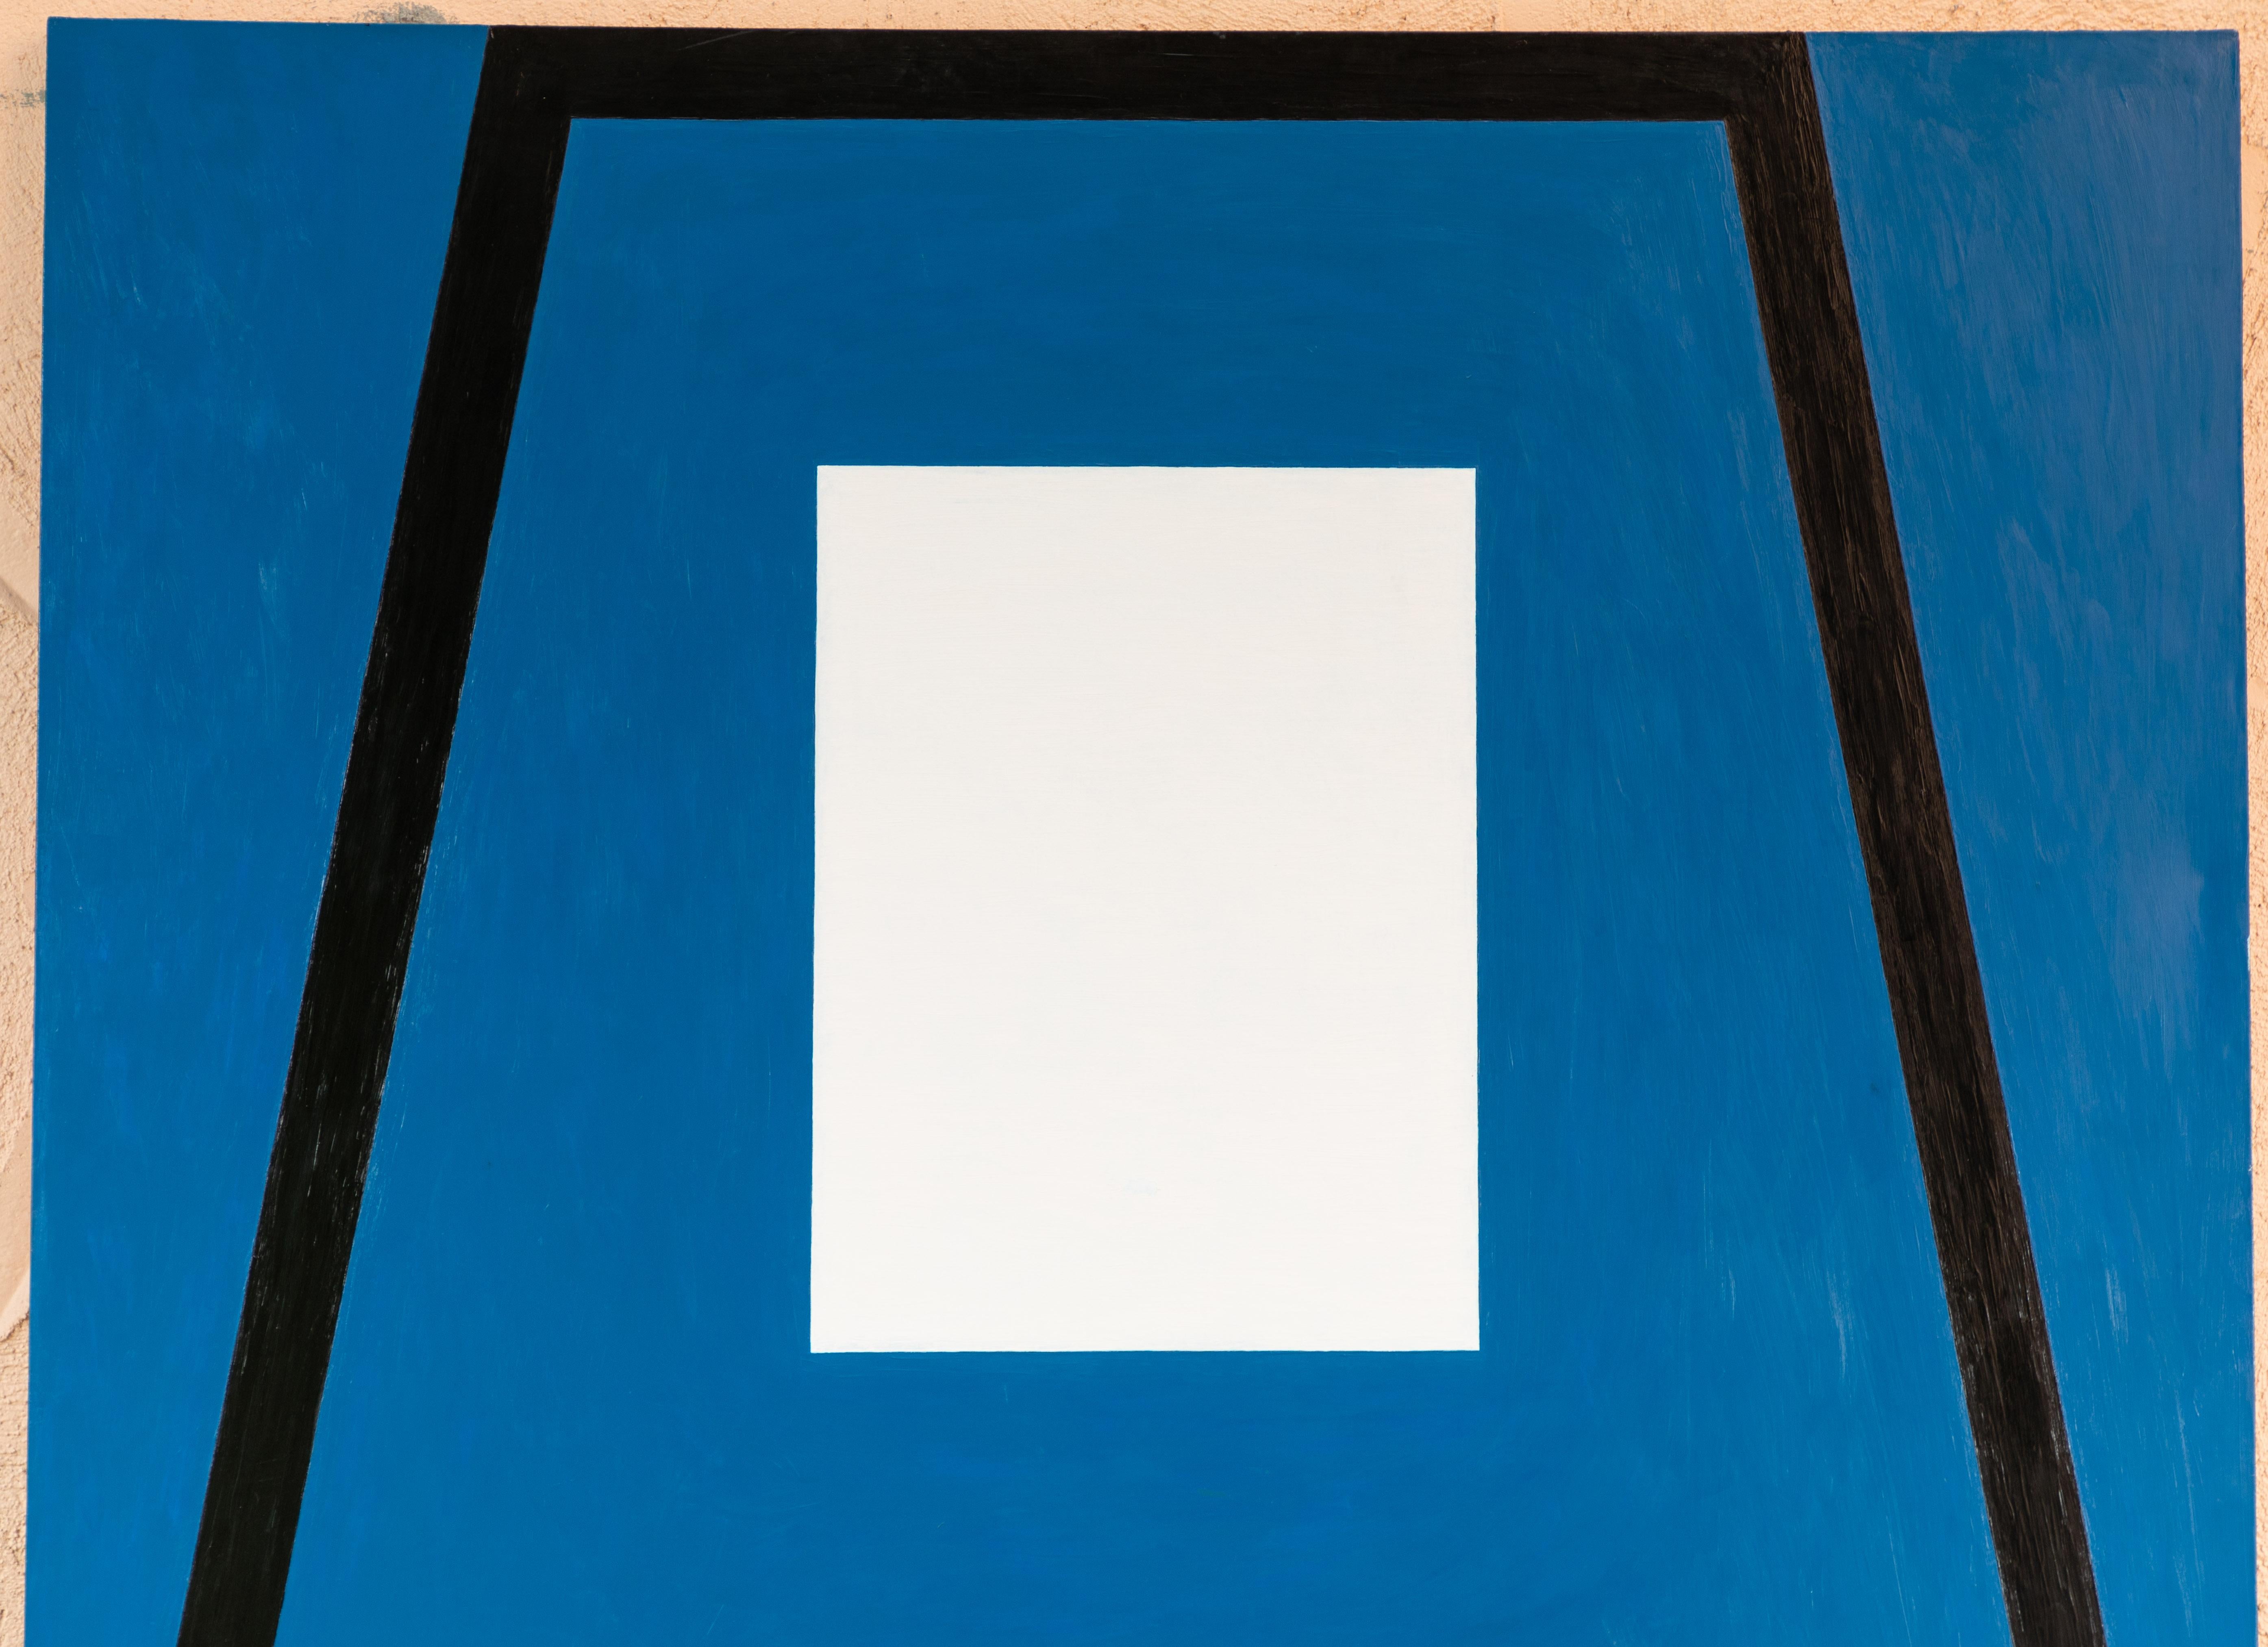 Extremely large scale work by listed artist Andrew Spence (b.1947). Intense blue with black and white geometric forms create a striking work. 
Mr. Spence lives and works in new York City. He received his M.F.A. from the University of California